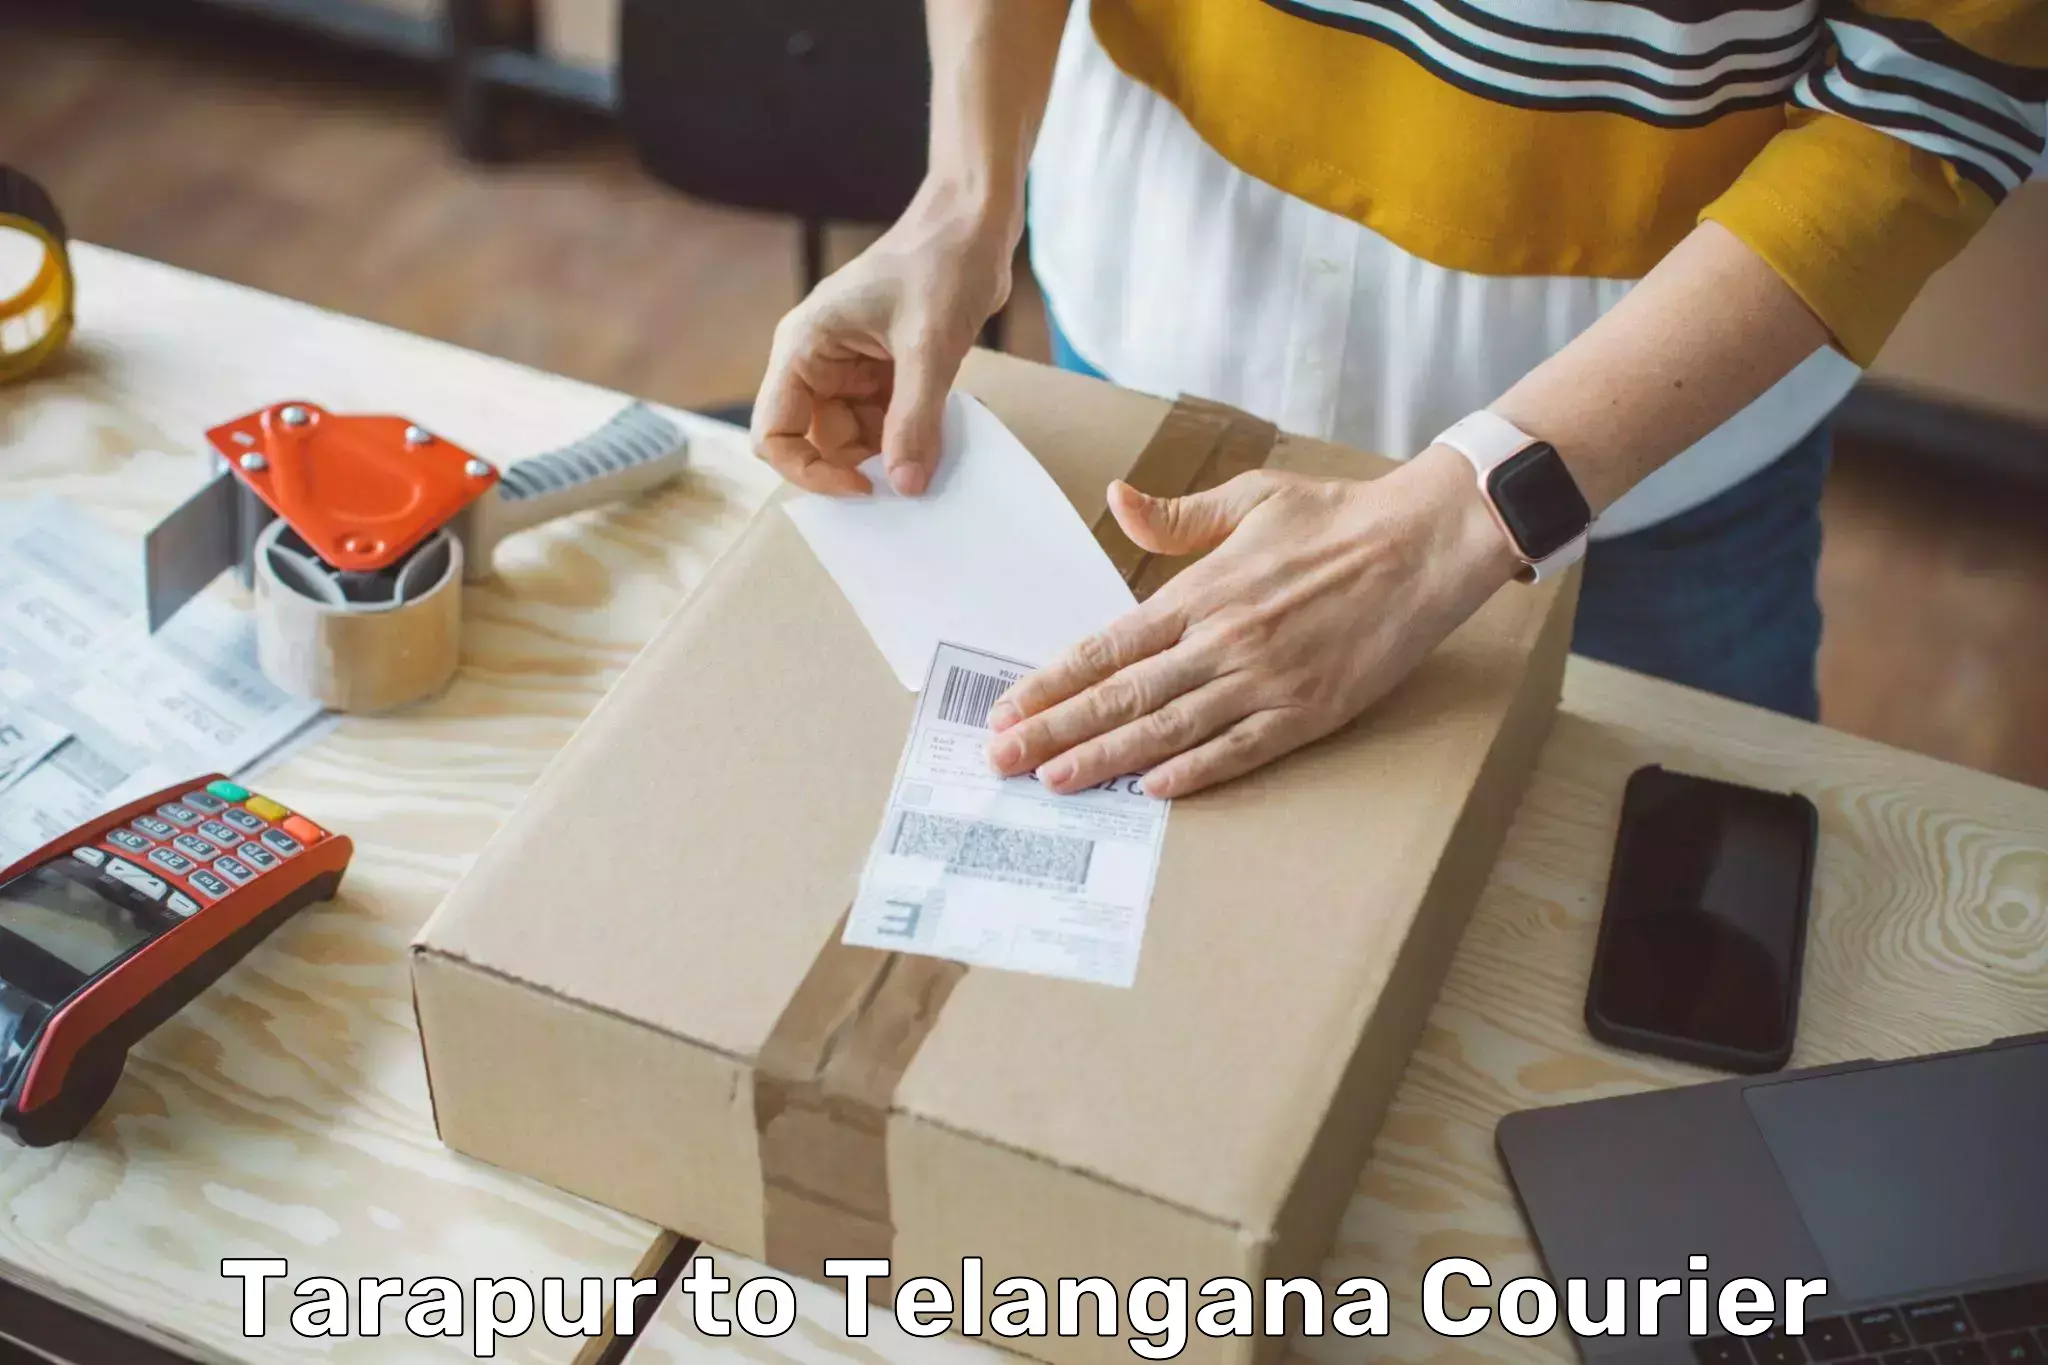 Reliable courier service Tarapur to Odela